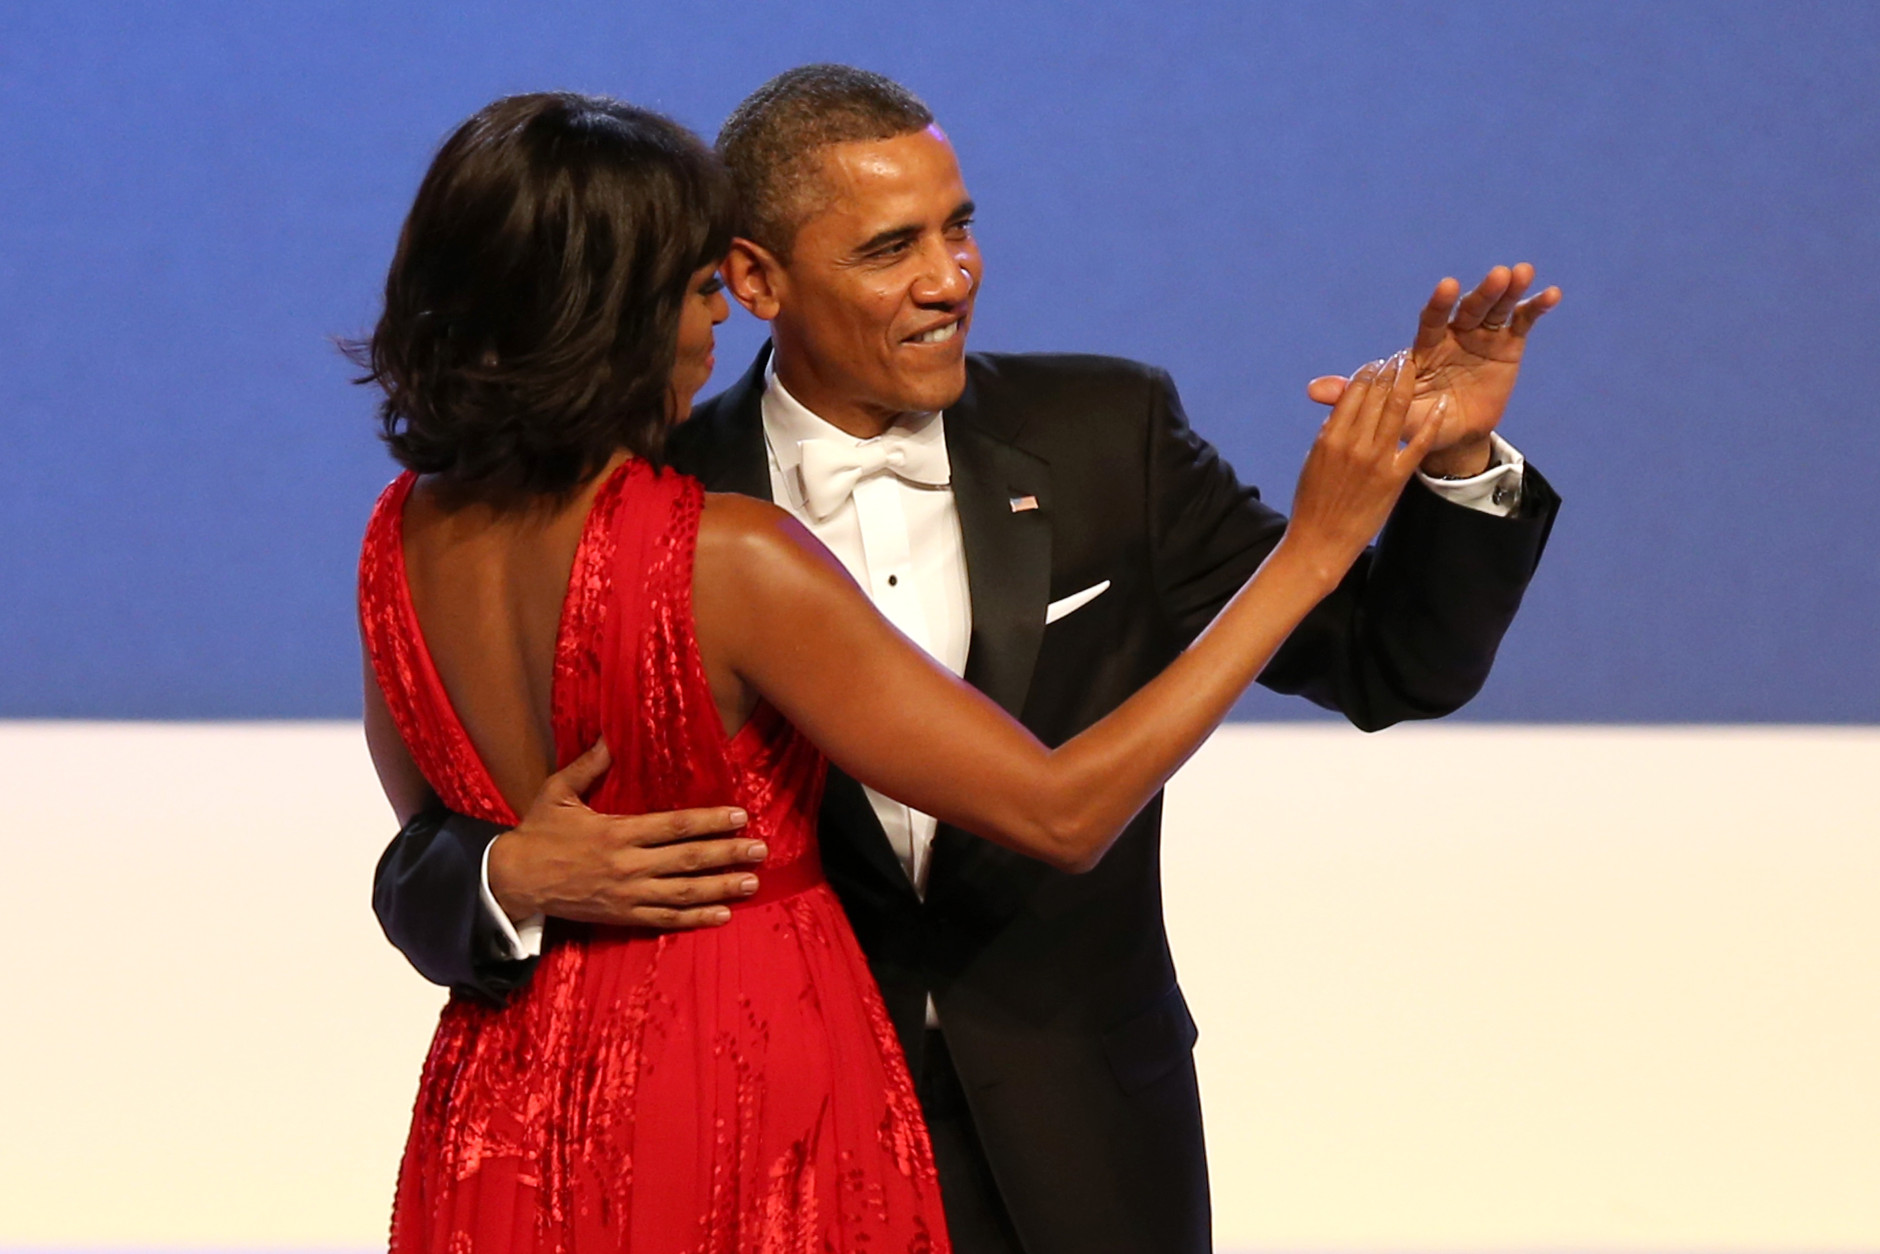 WASHINGTON, DC - JANUARY 21:  U.S. President Barack Obama and first lady Michelle Obama dance  during the Public Inaugural Ball at the Walter E. Washington Convention Center on January 21, 2013 in Washington, DC. President Obama was sworn in for his second term earlier in the day.  (Photo by Mario Tama/Getty Images)